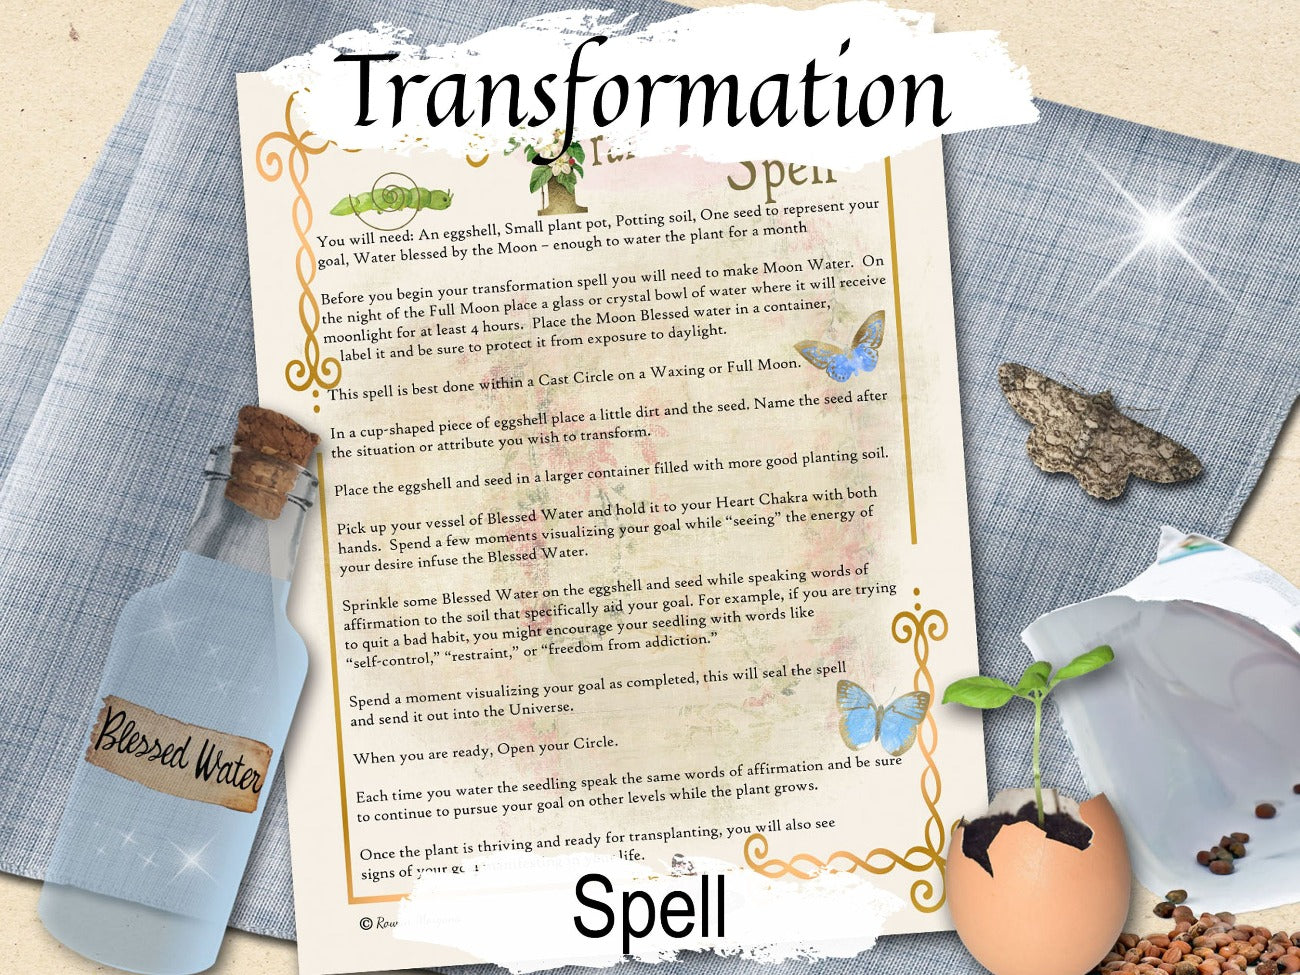 TRANSFORMATION SPELL, Change your Life Spell, Wicca Change Your Mindset, Healthy Life Habits, Mindset Magick Break Addiction, Will Power - Morgana Magick Spell